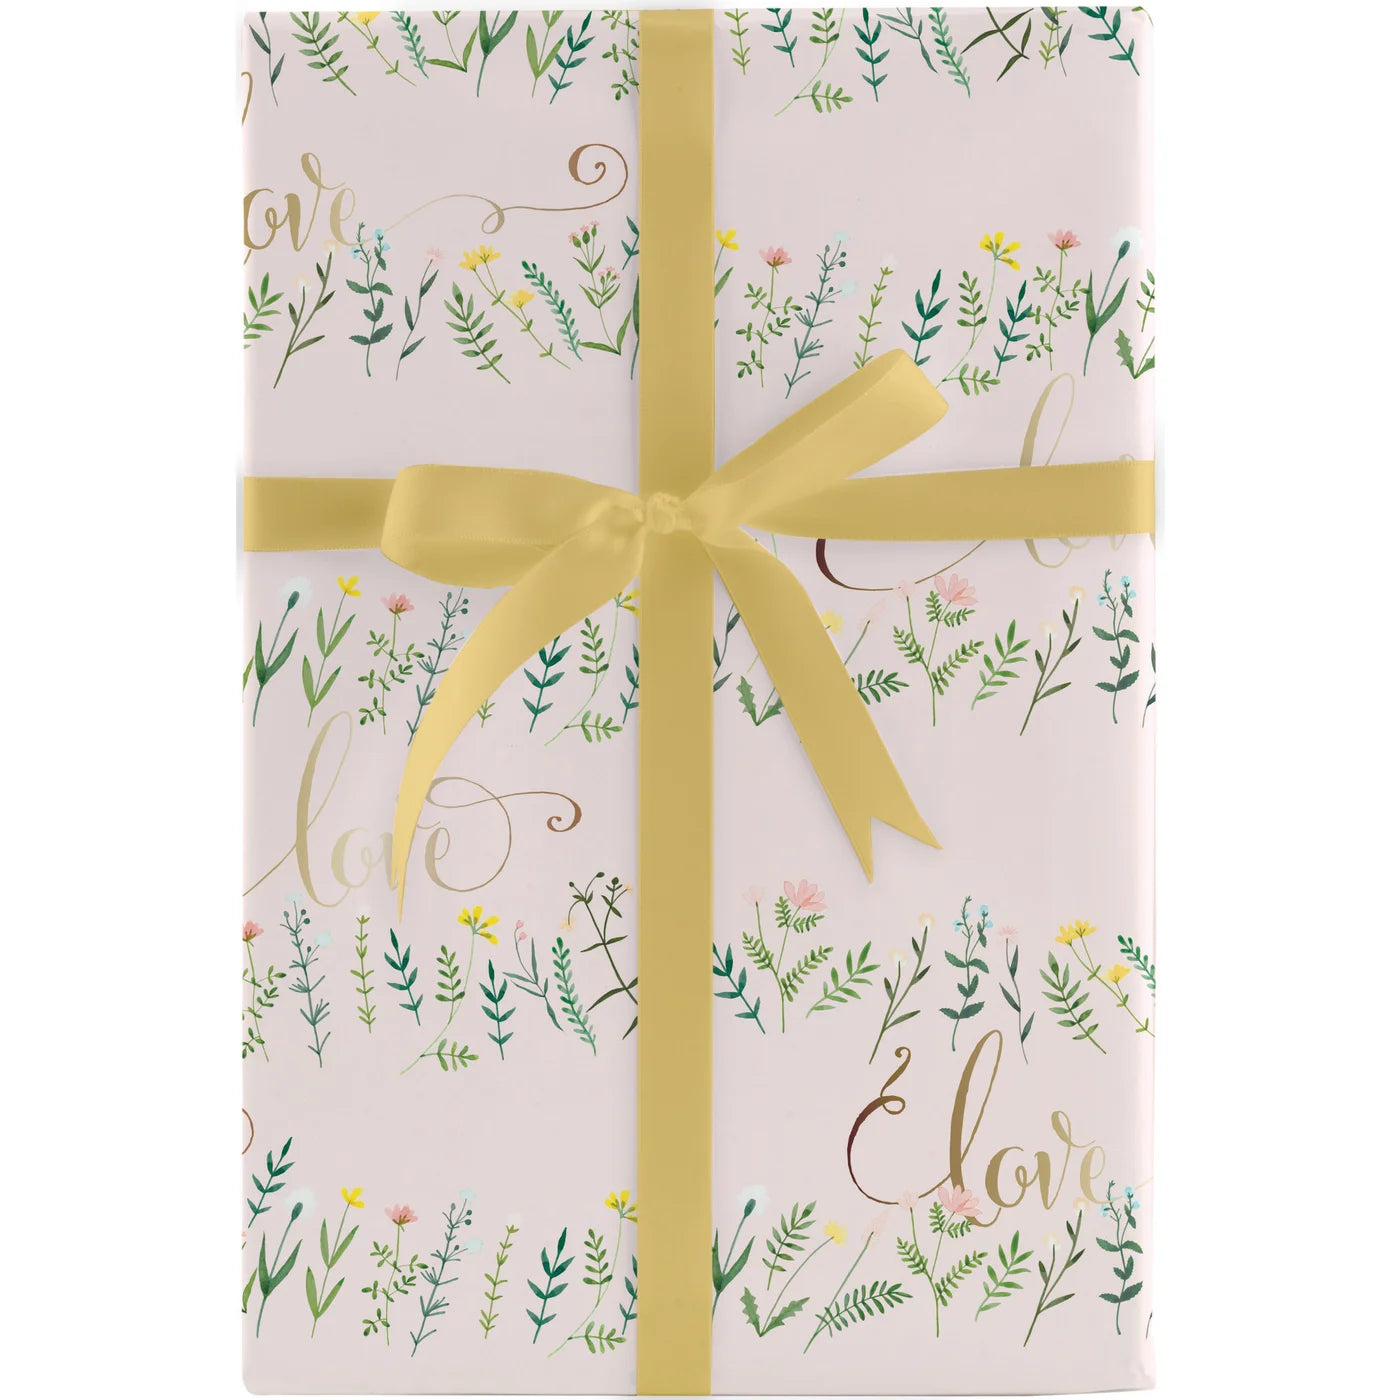 Wildflower Love Wrapping Paper Roll